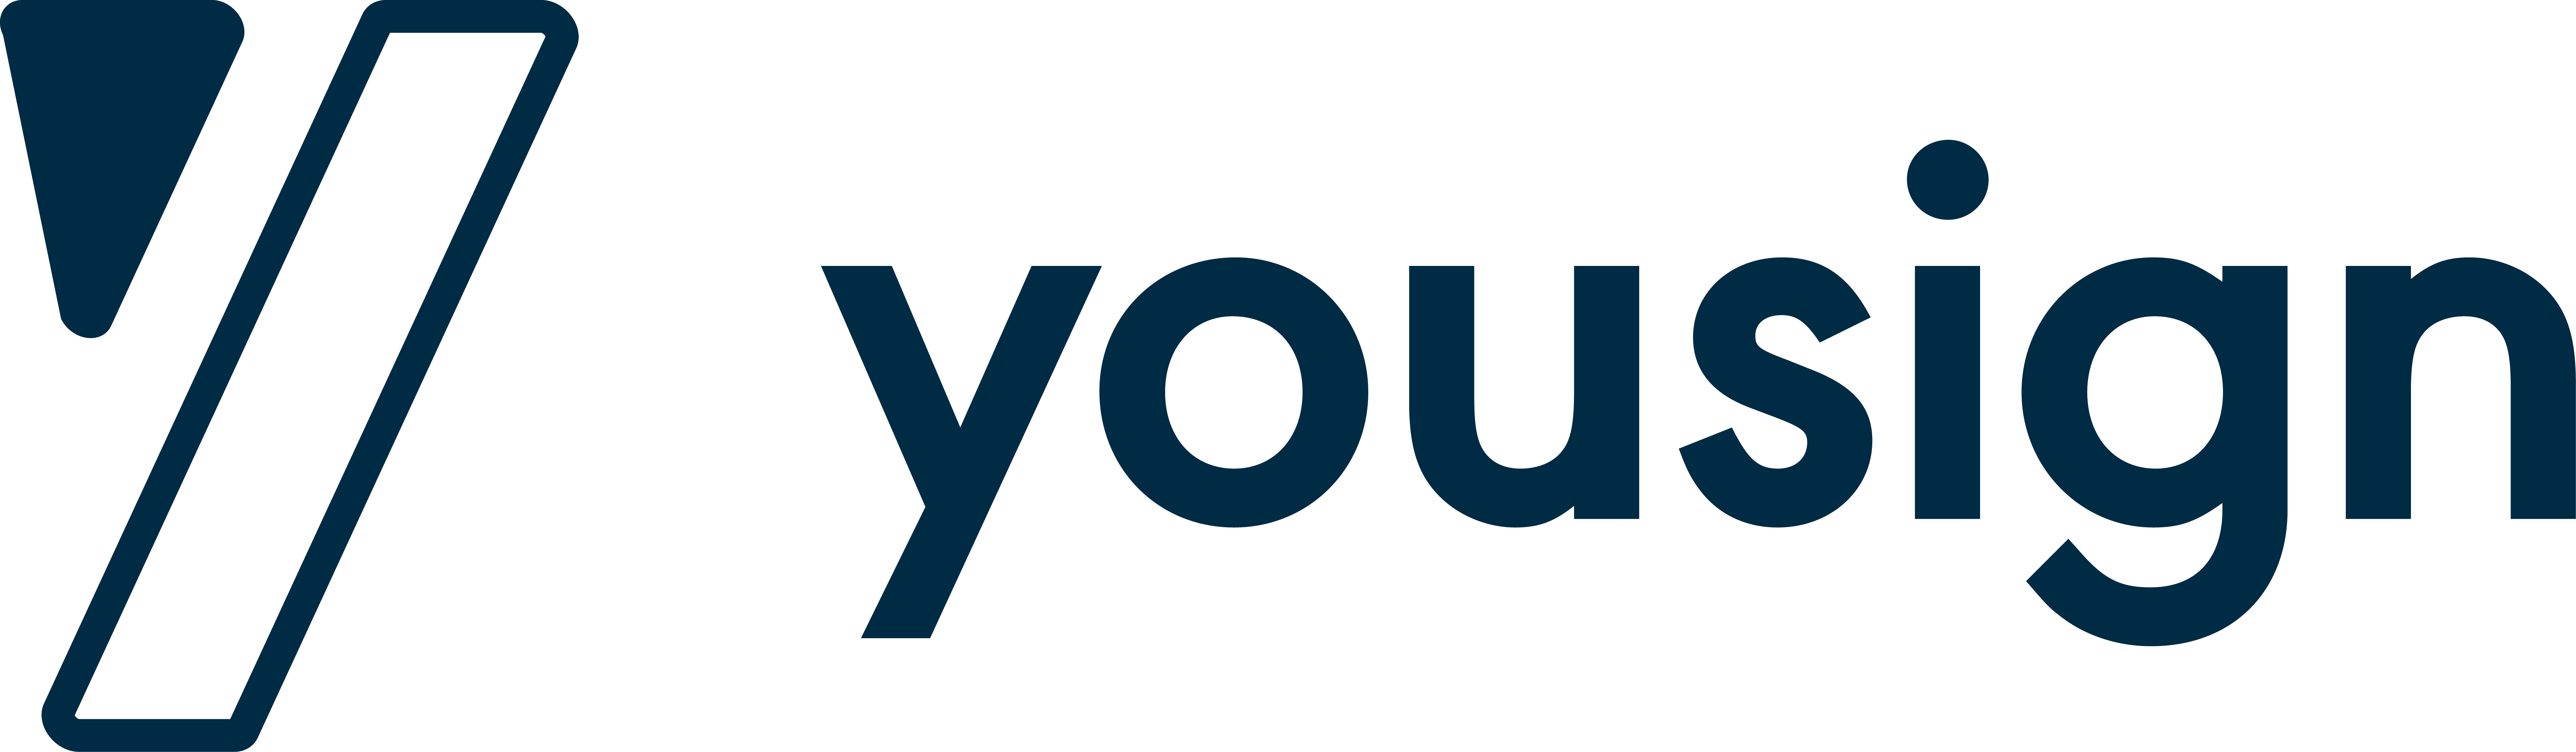 Logo of Yousign